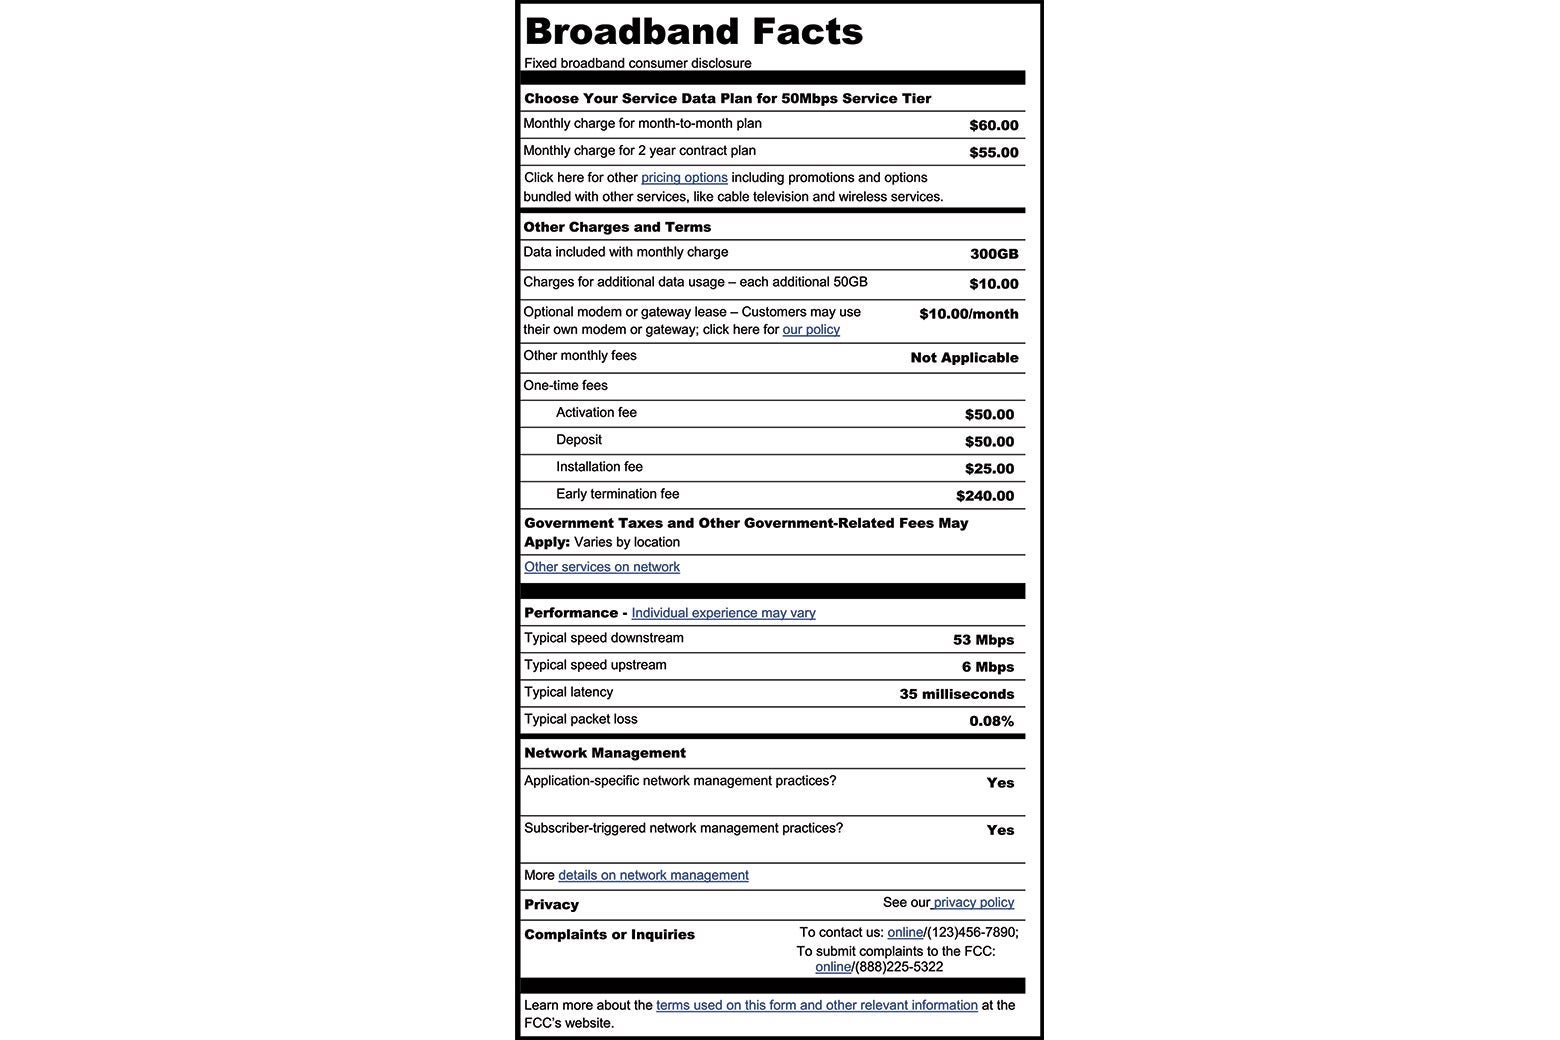 A proposed facts label to be put on broadband modems.